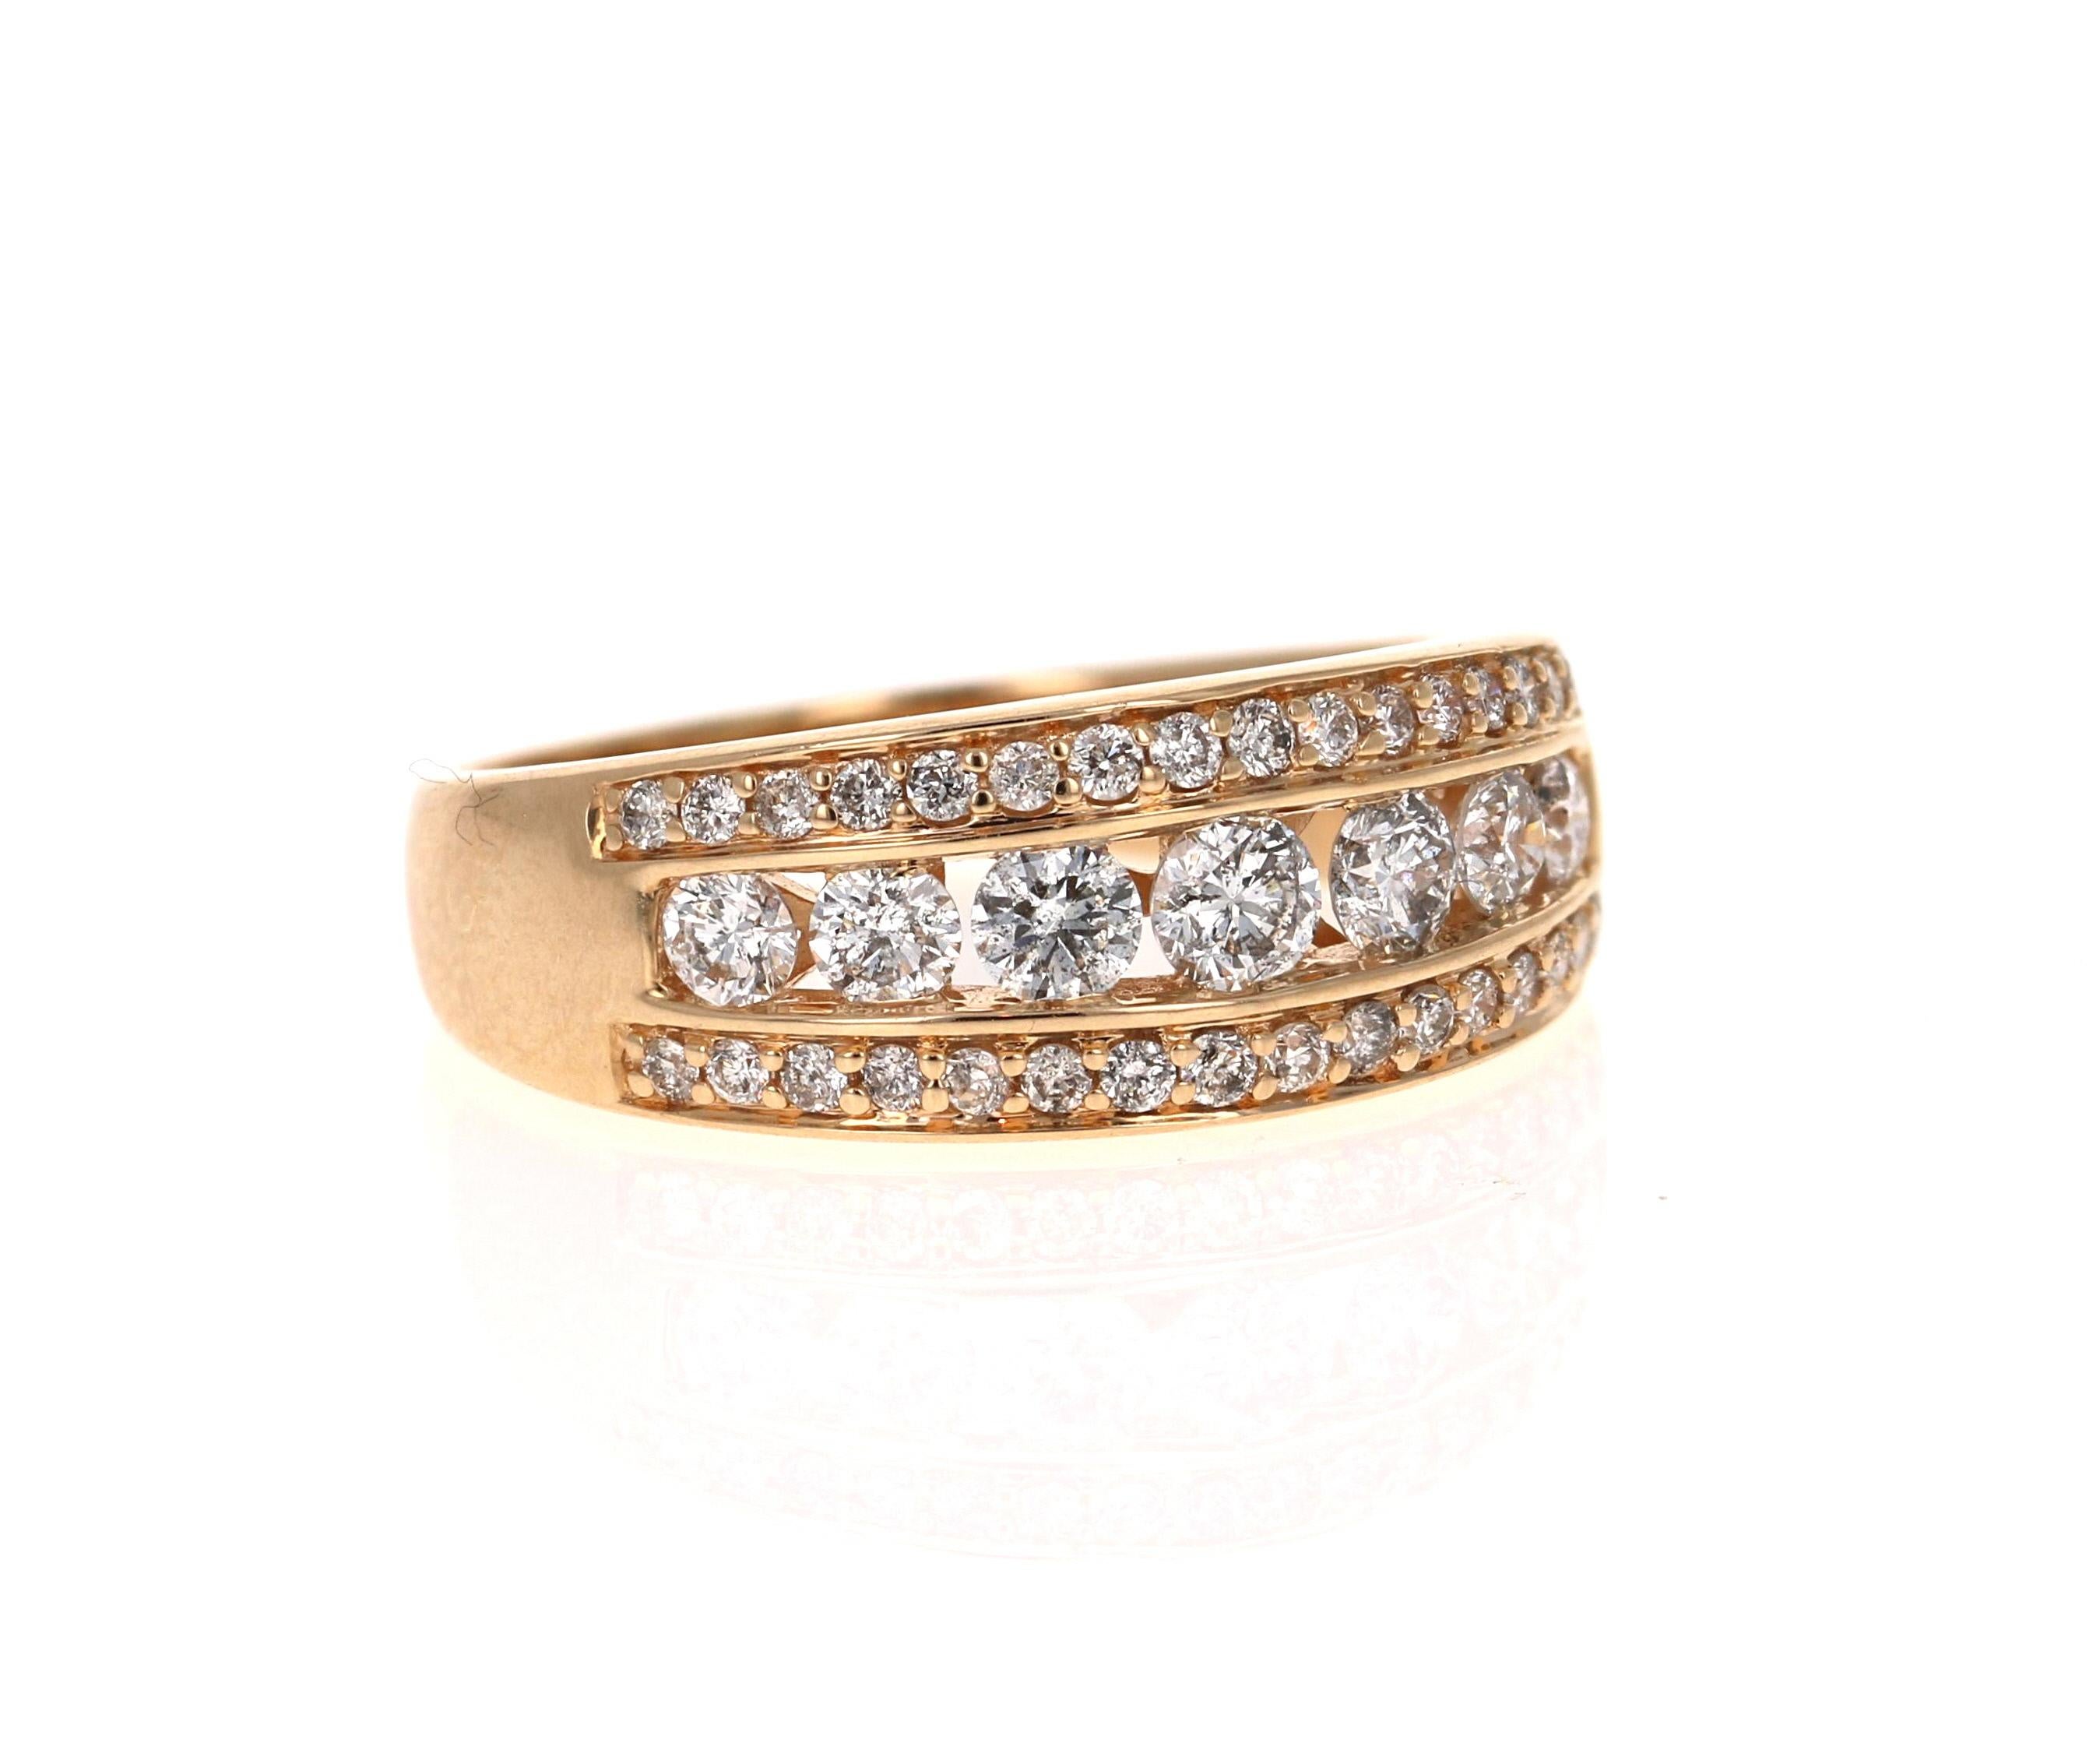 A Simple and Classy Diamond Band that is sure to elevate your jewelry collection! Great as an everyday wear or as a special occasion ring. 
The ring has 39 Round Cut Diamonds that weigh 1.20 Carats 
The setting is beautifully crafted in 14K Yellow